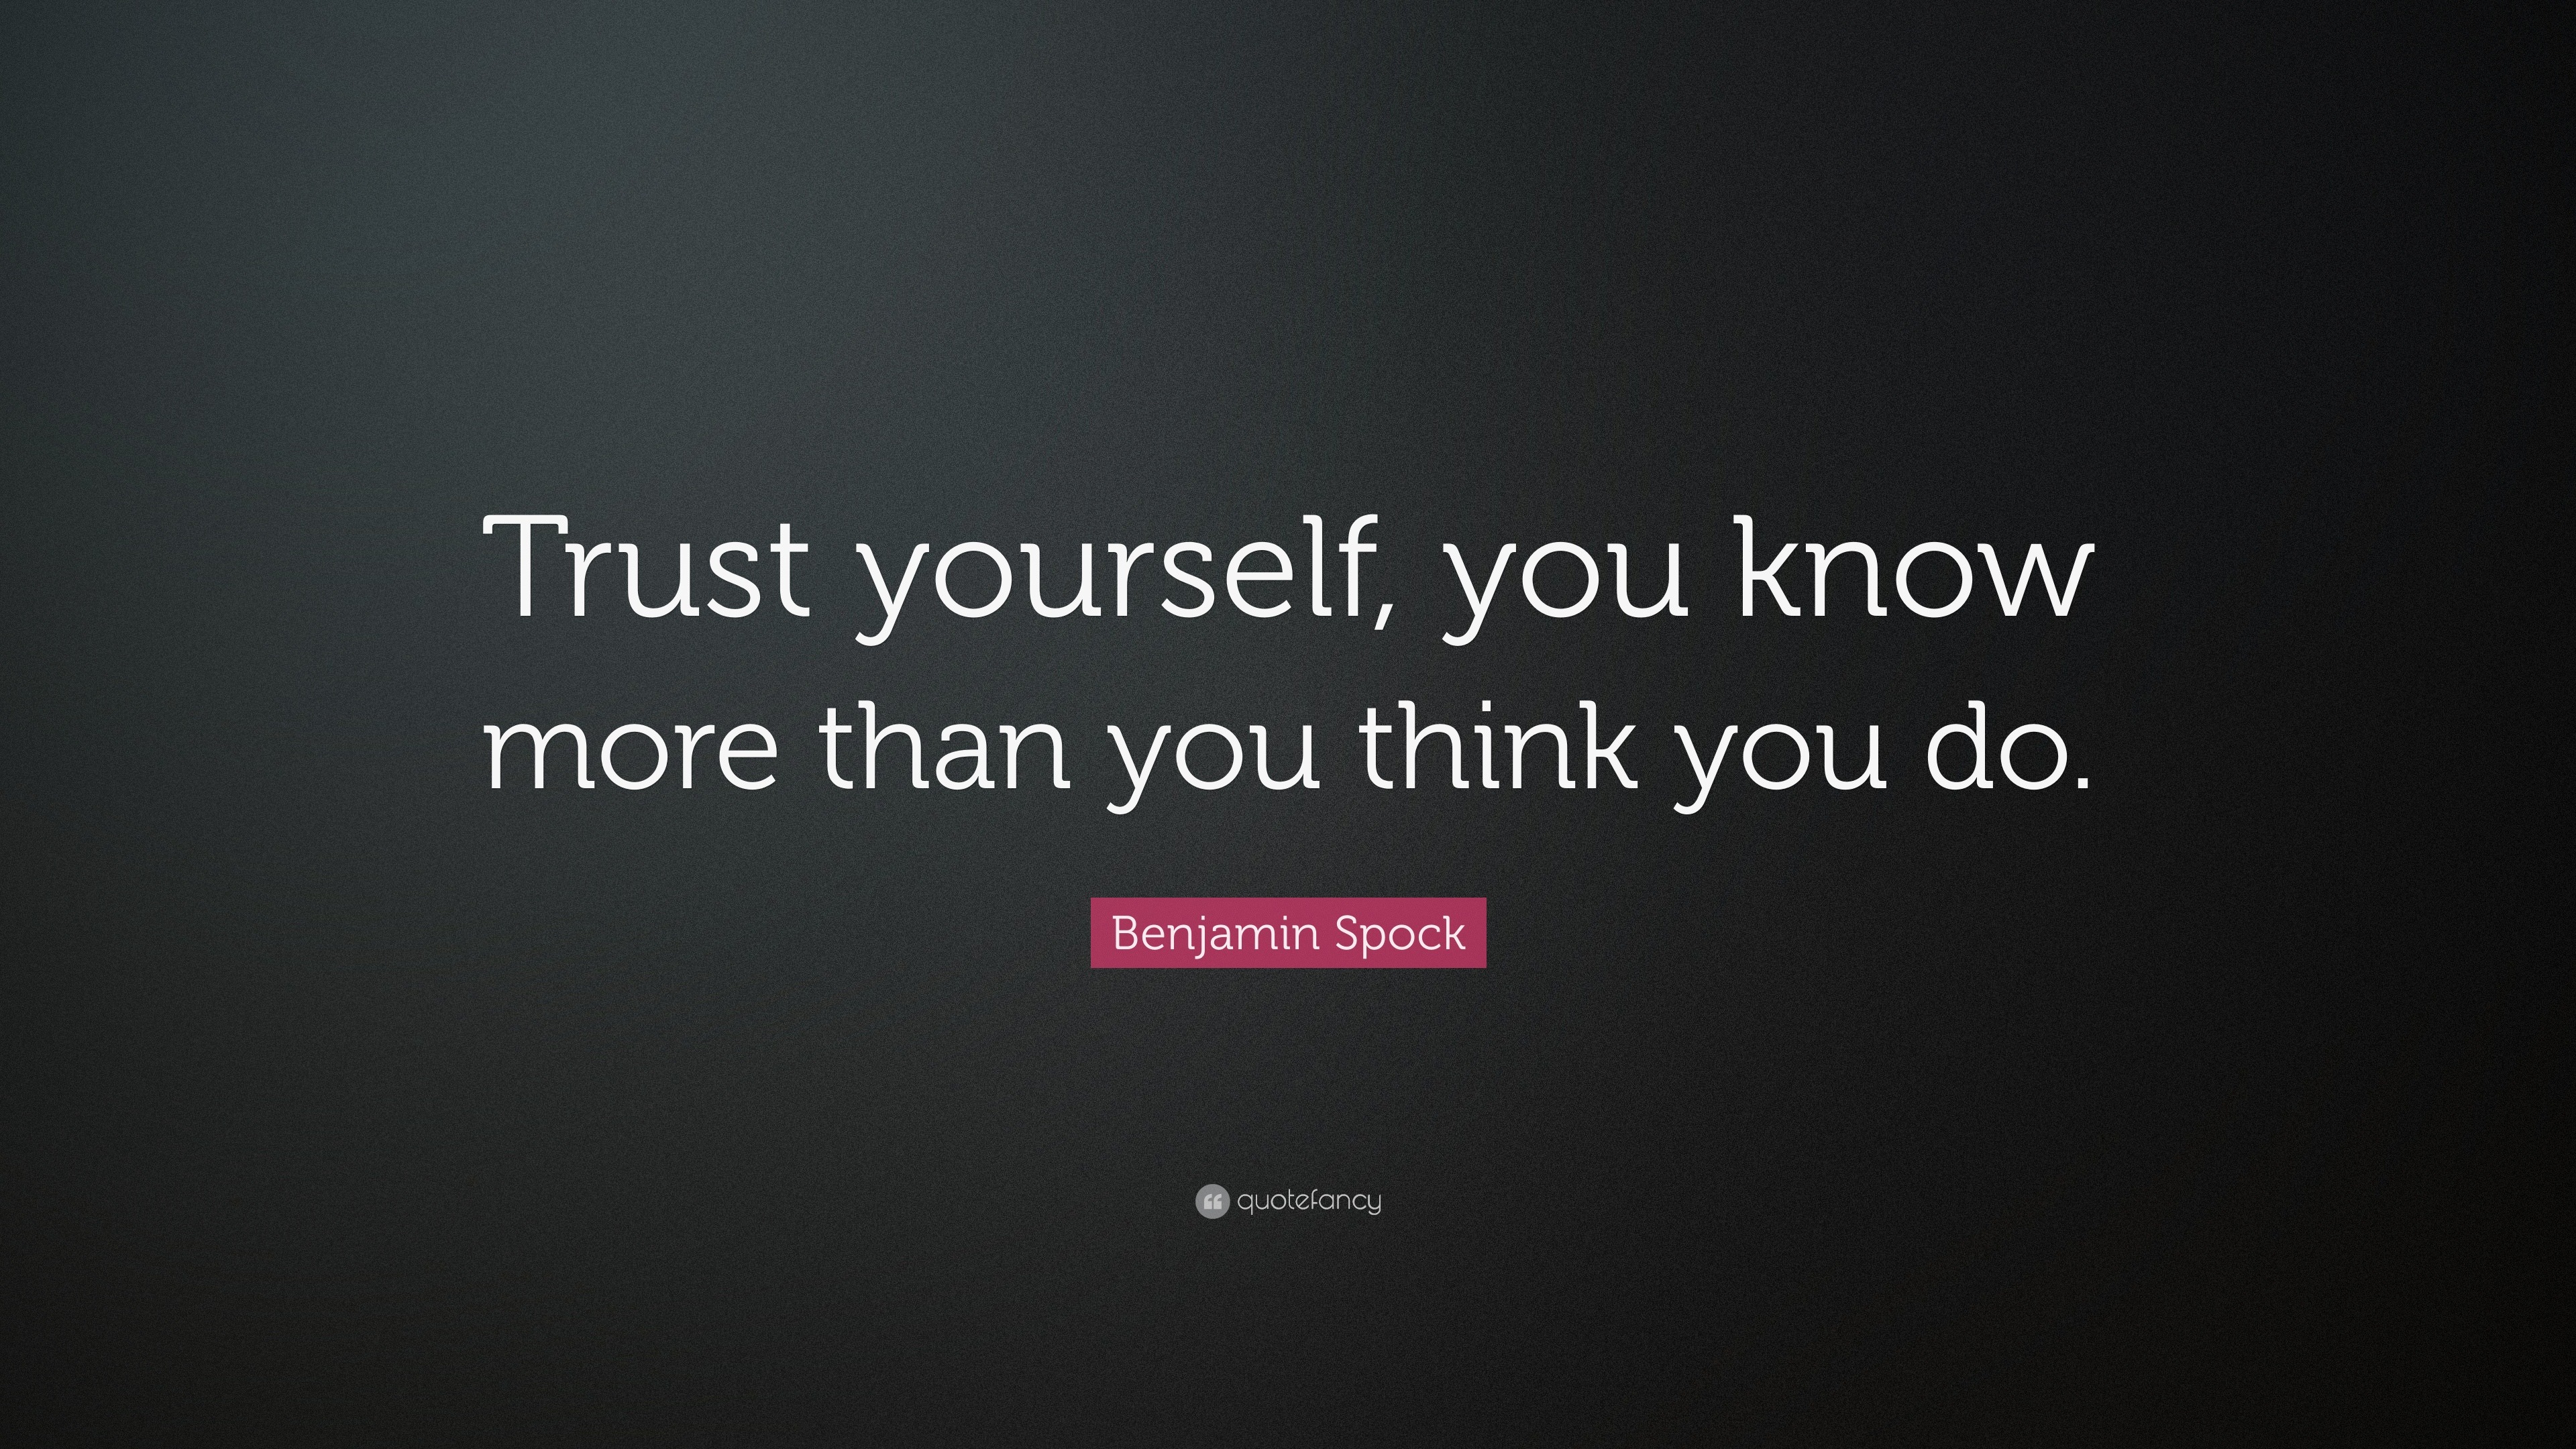 Benjamin Spock Quote: "Trust yourself, you know more than ...